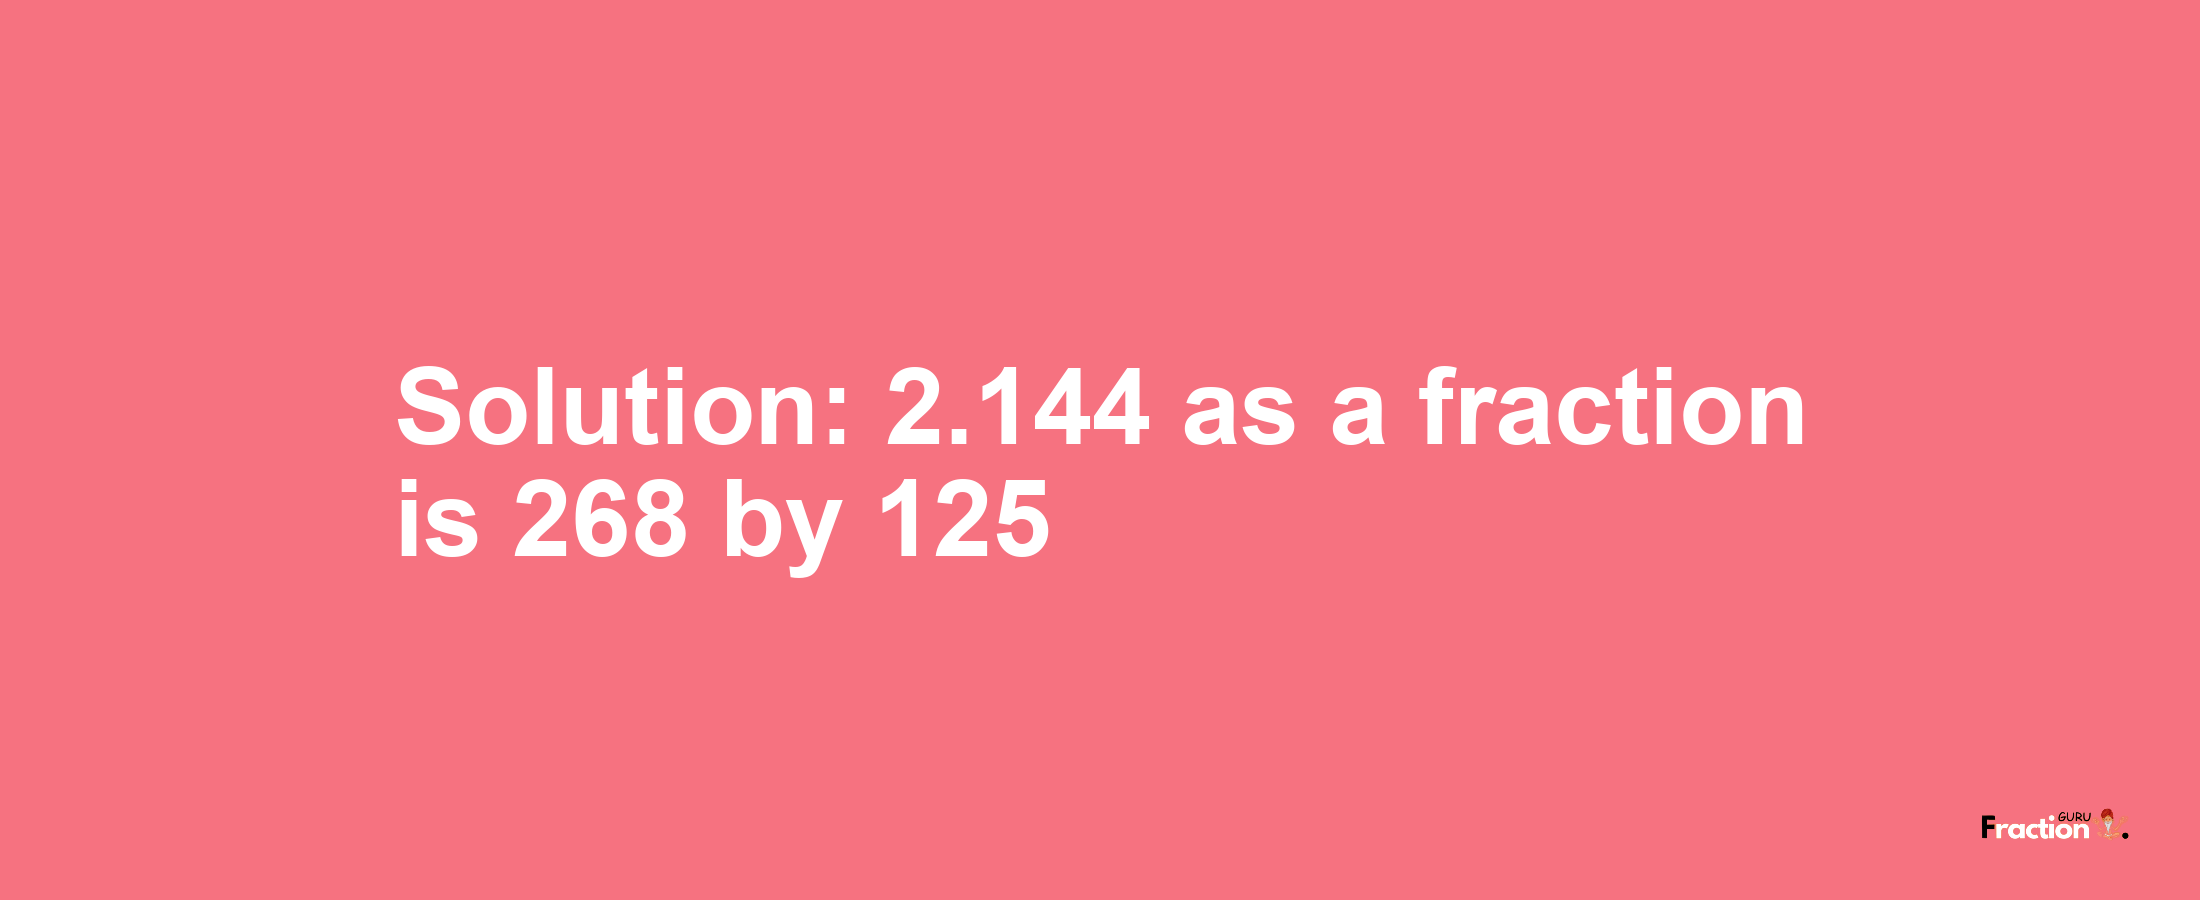 Solution:2.144 as a fraction is 268/125